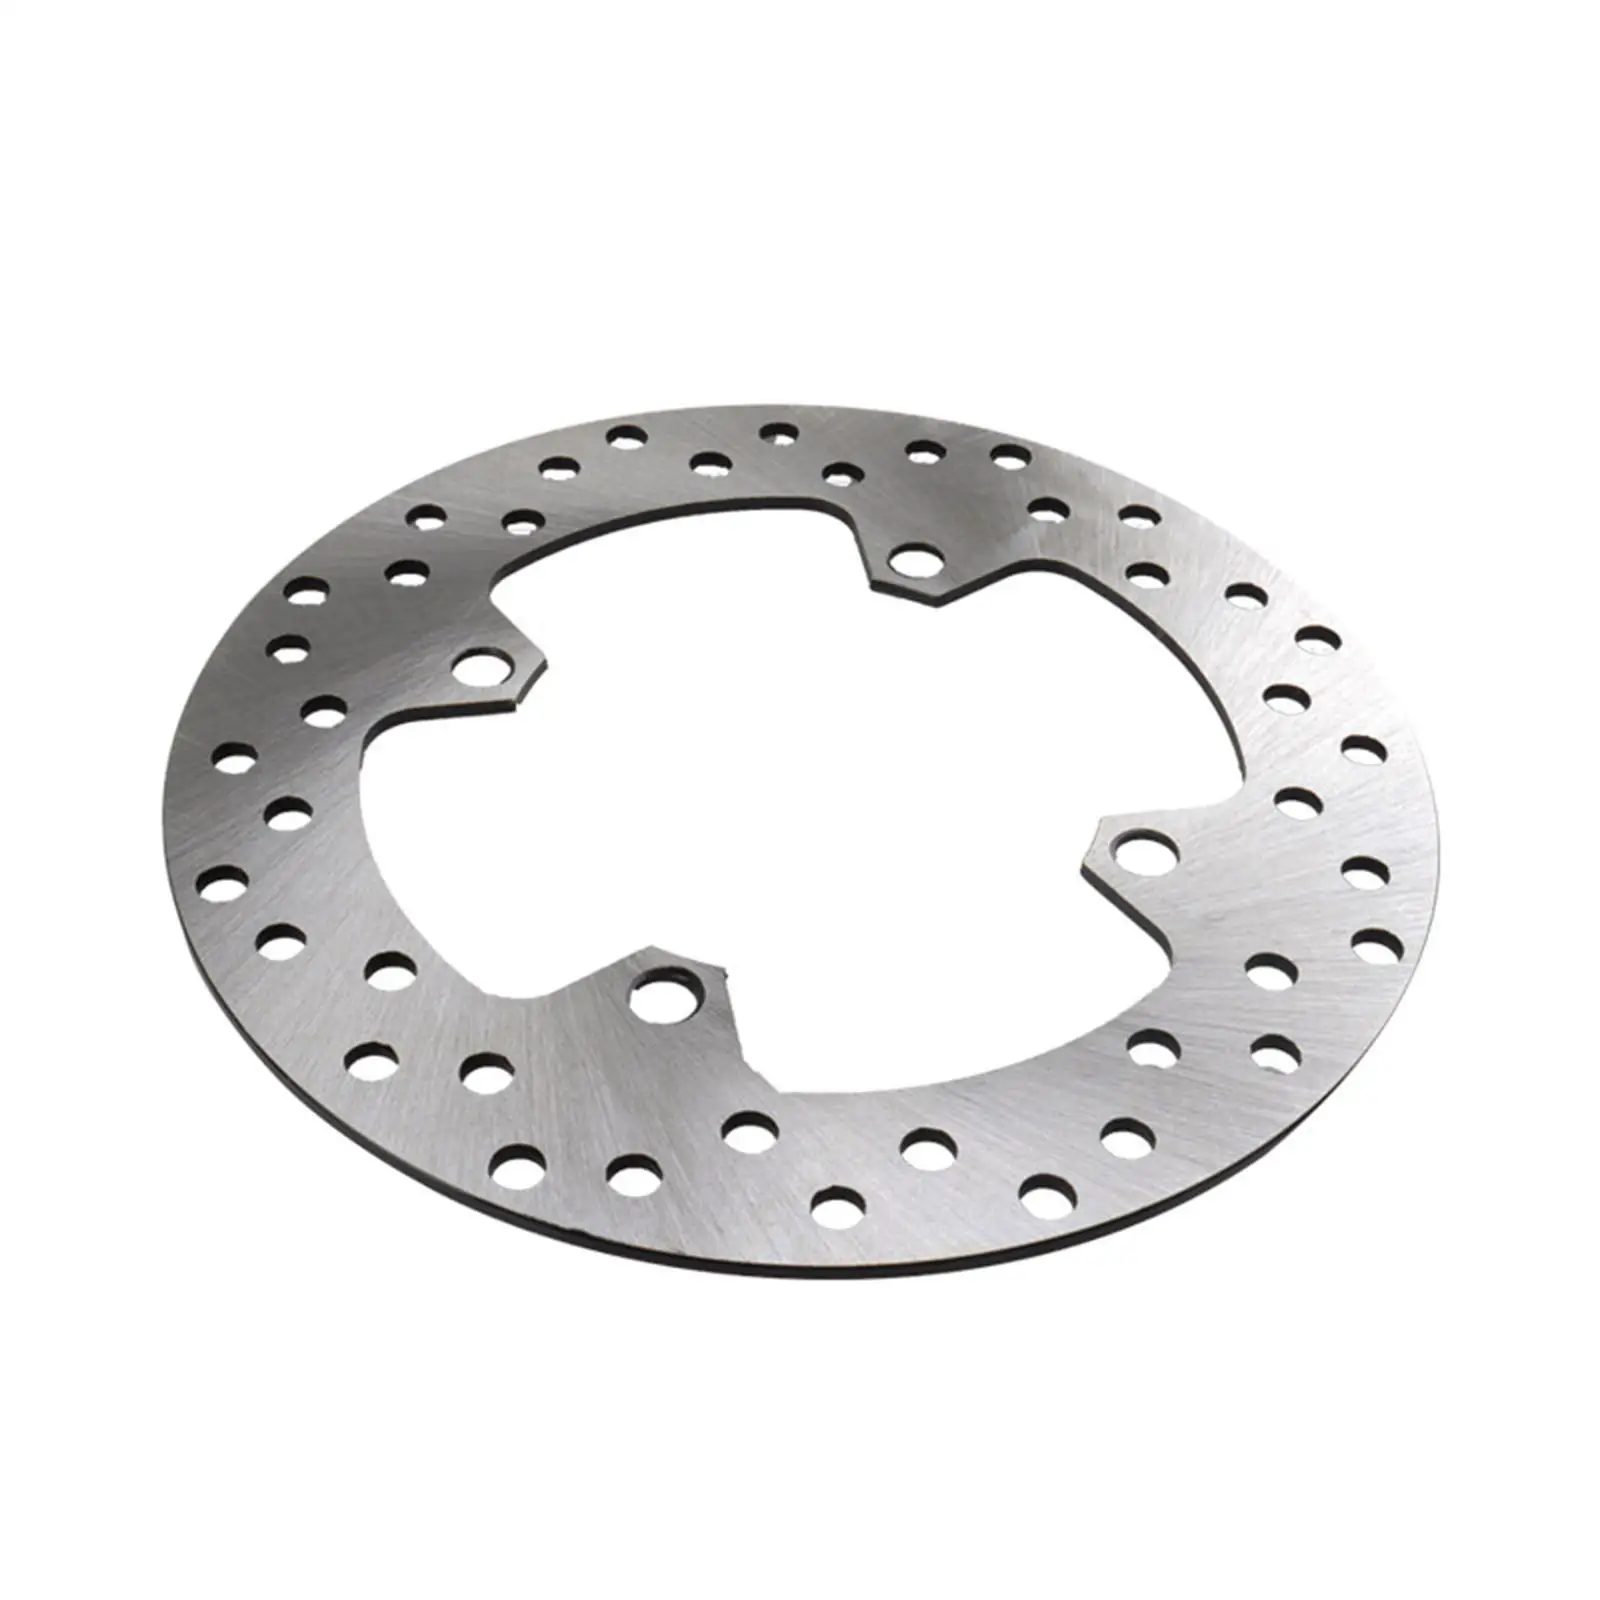 Motorcycle Brake Disc Durable Replacement Stainless Steel Accessory High Strength for Honda XR400 XR250R TRX400EX XR600R